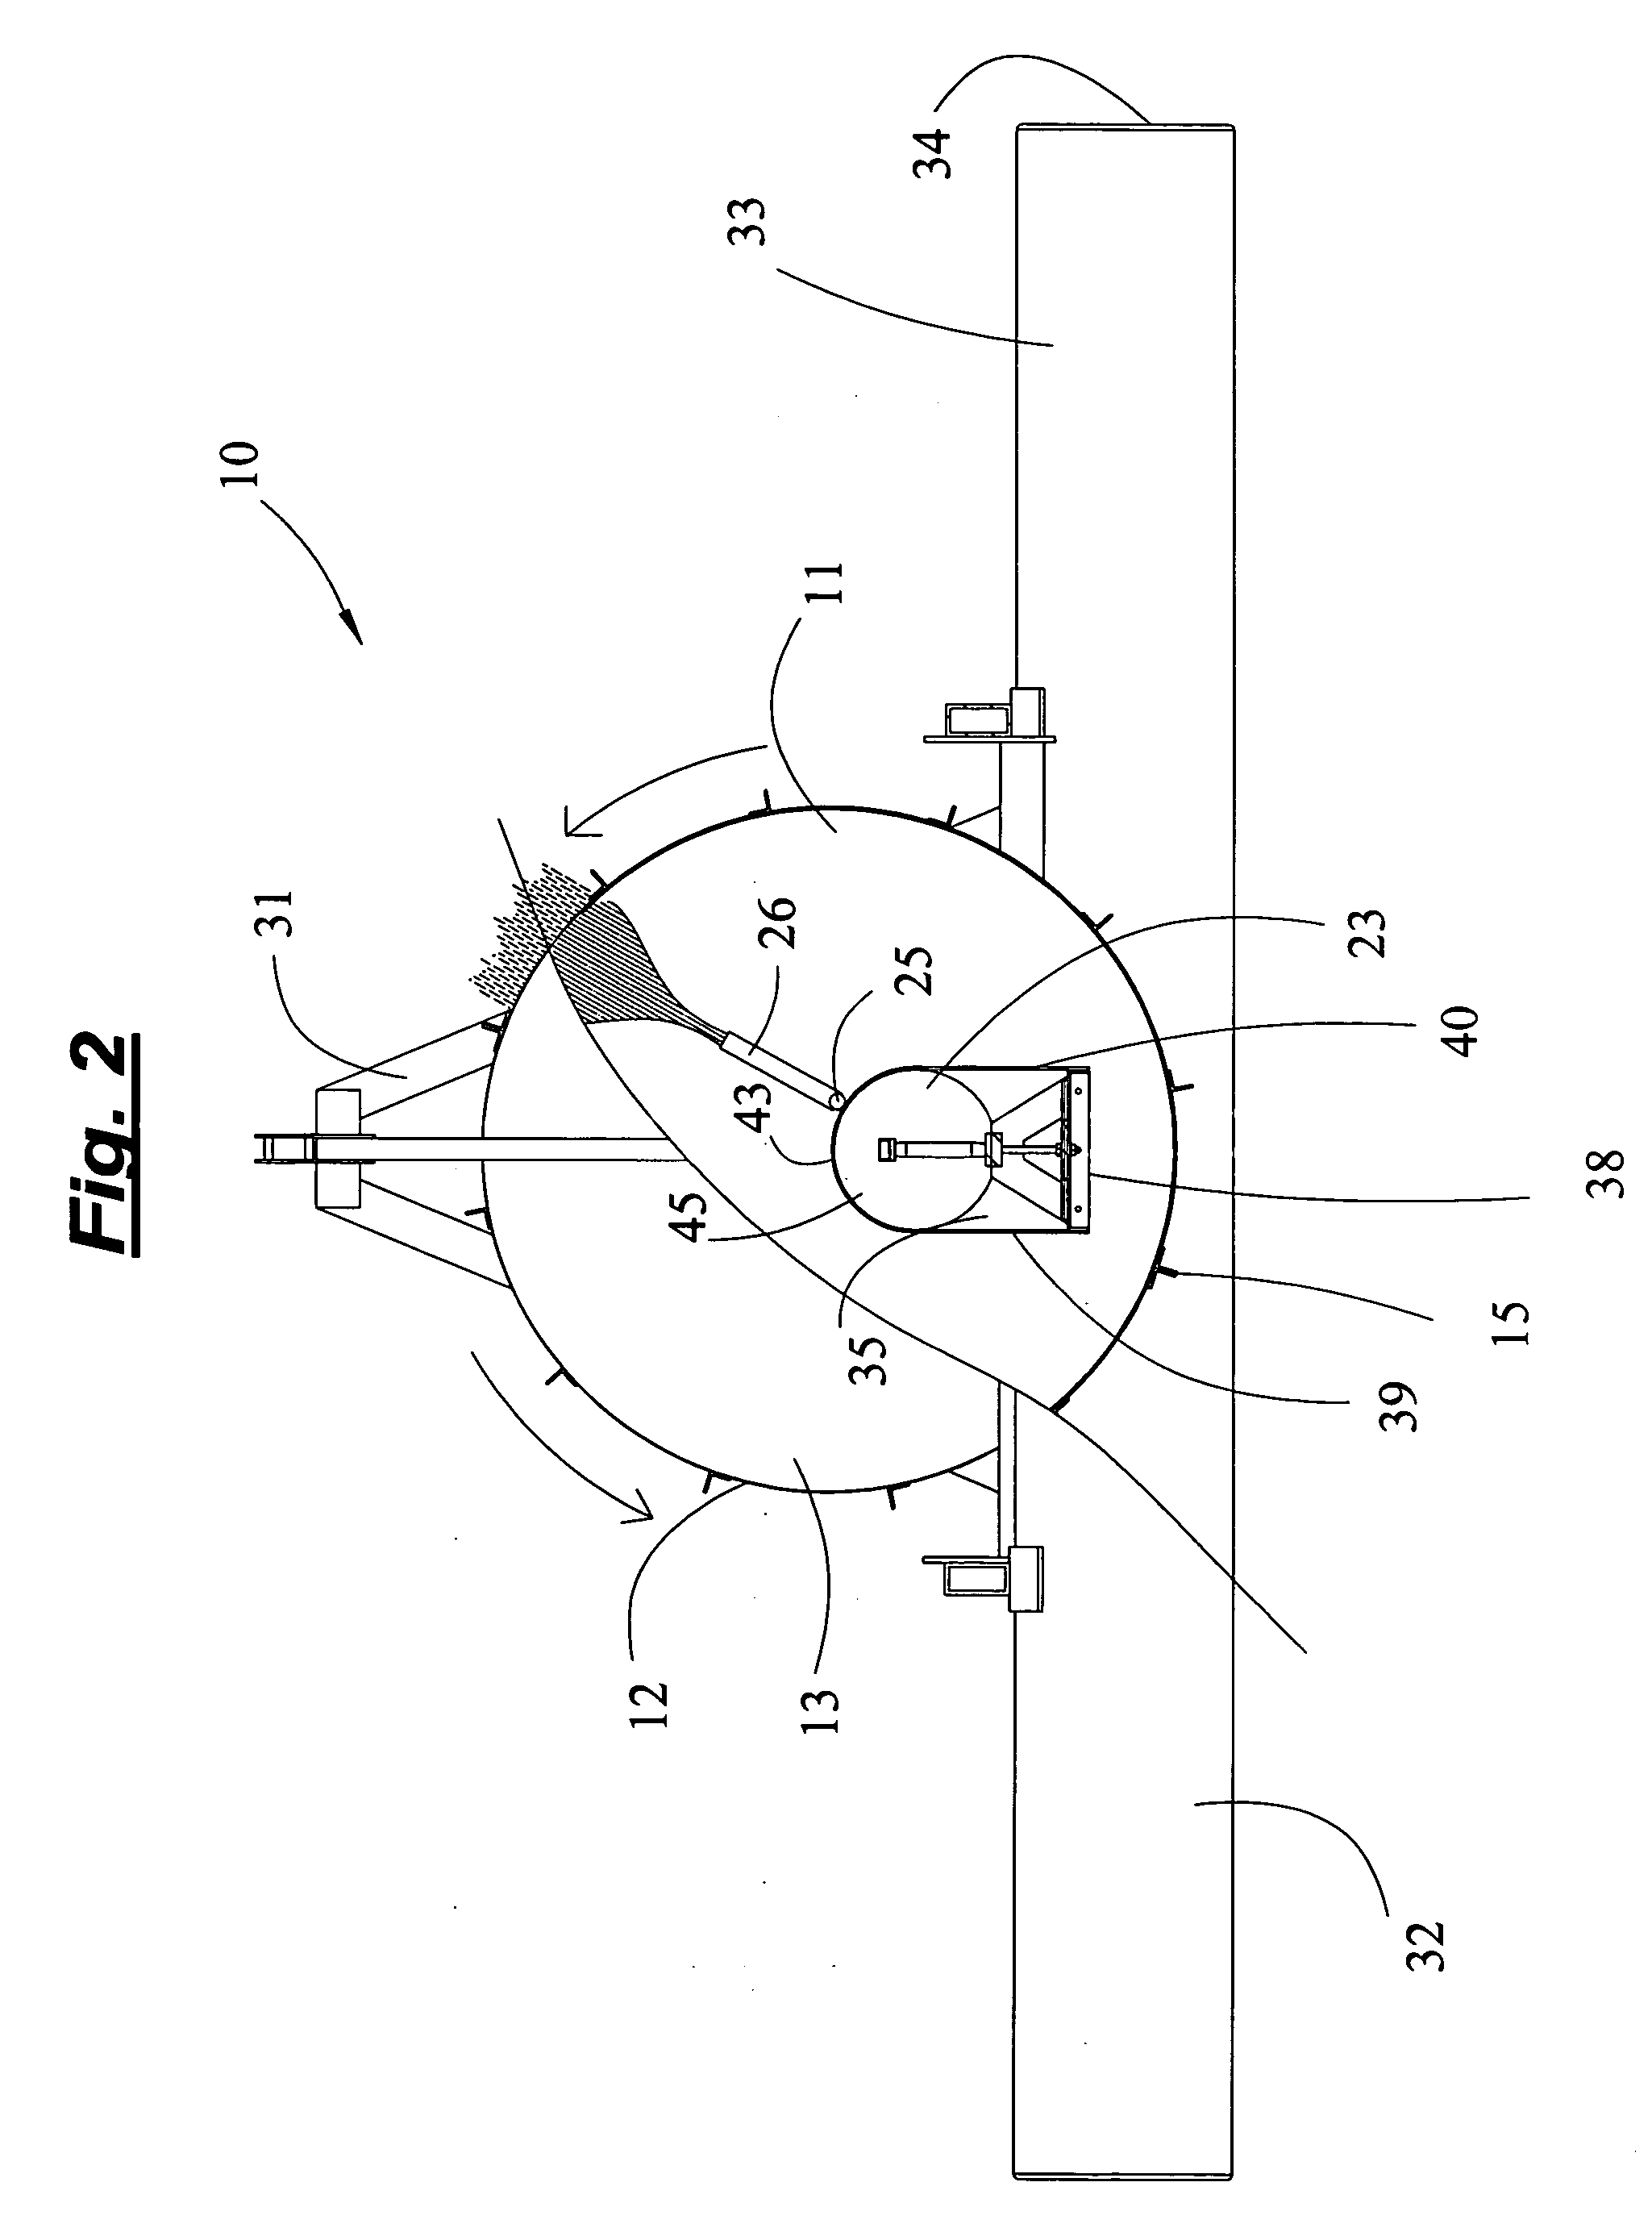 Self-cleaning screen with check valve for use in shallow water pumping